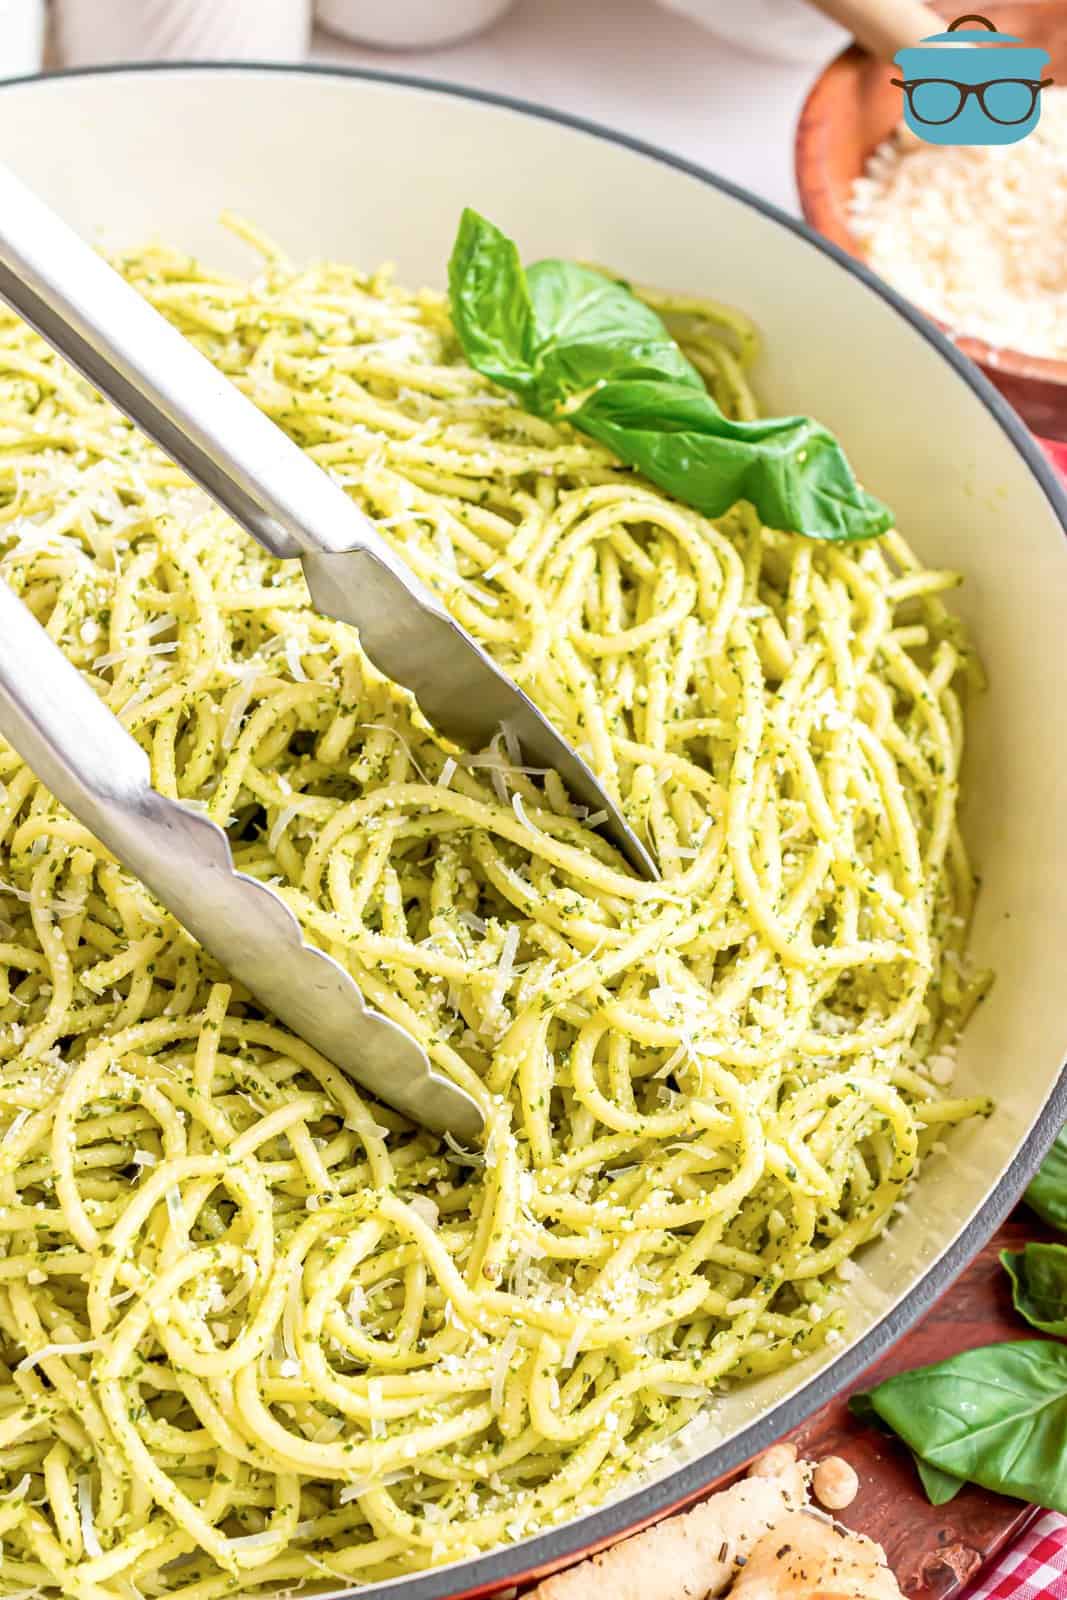 Tongs in a bowl of pasta with pesto sauce.